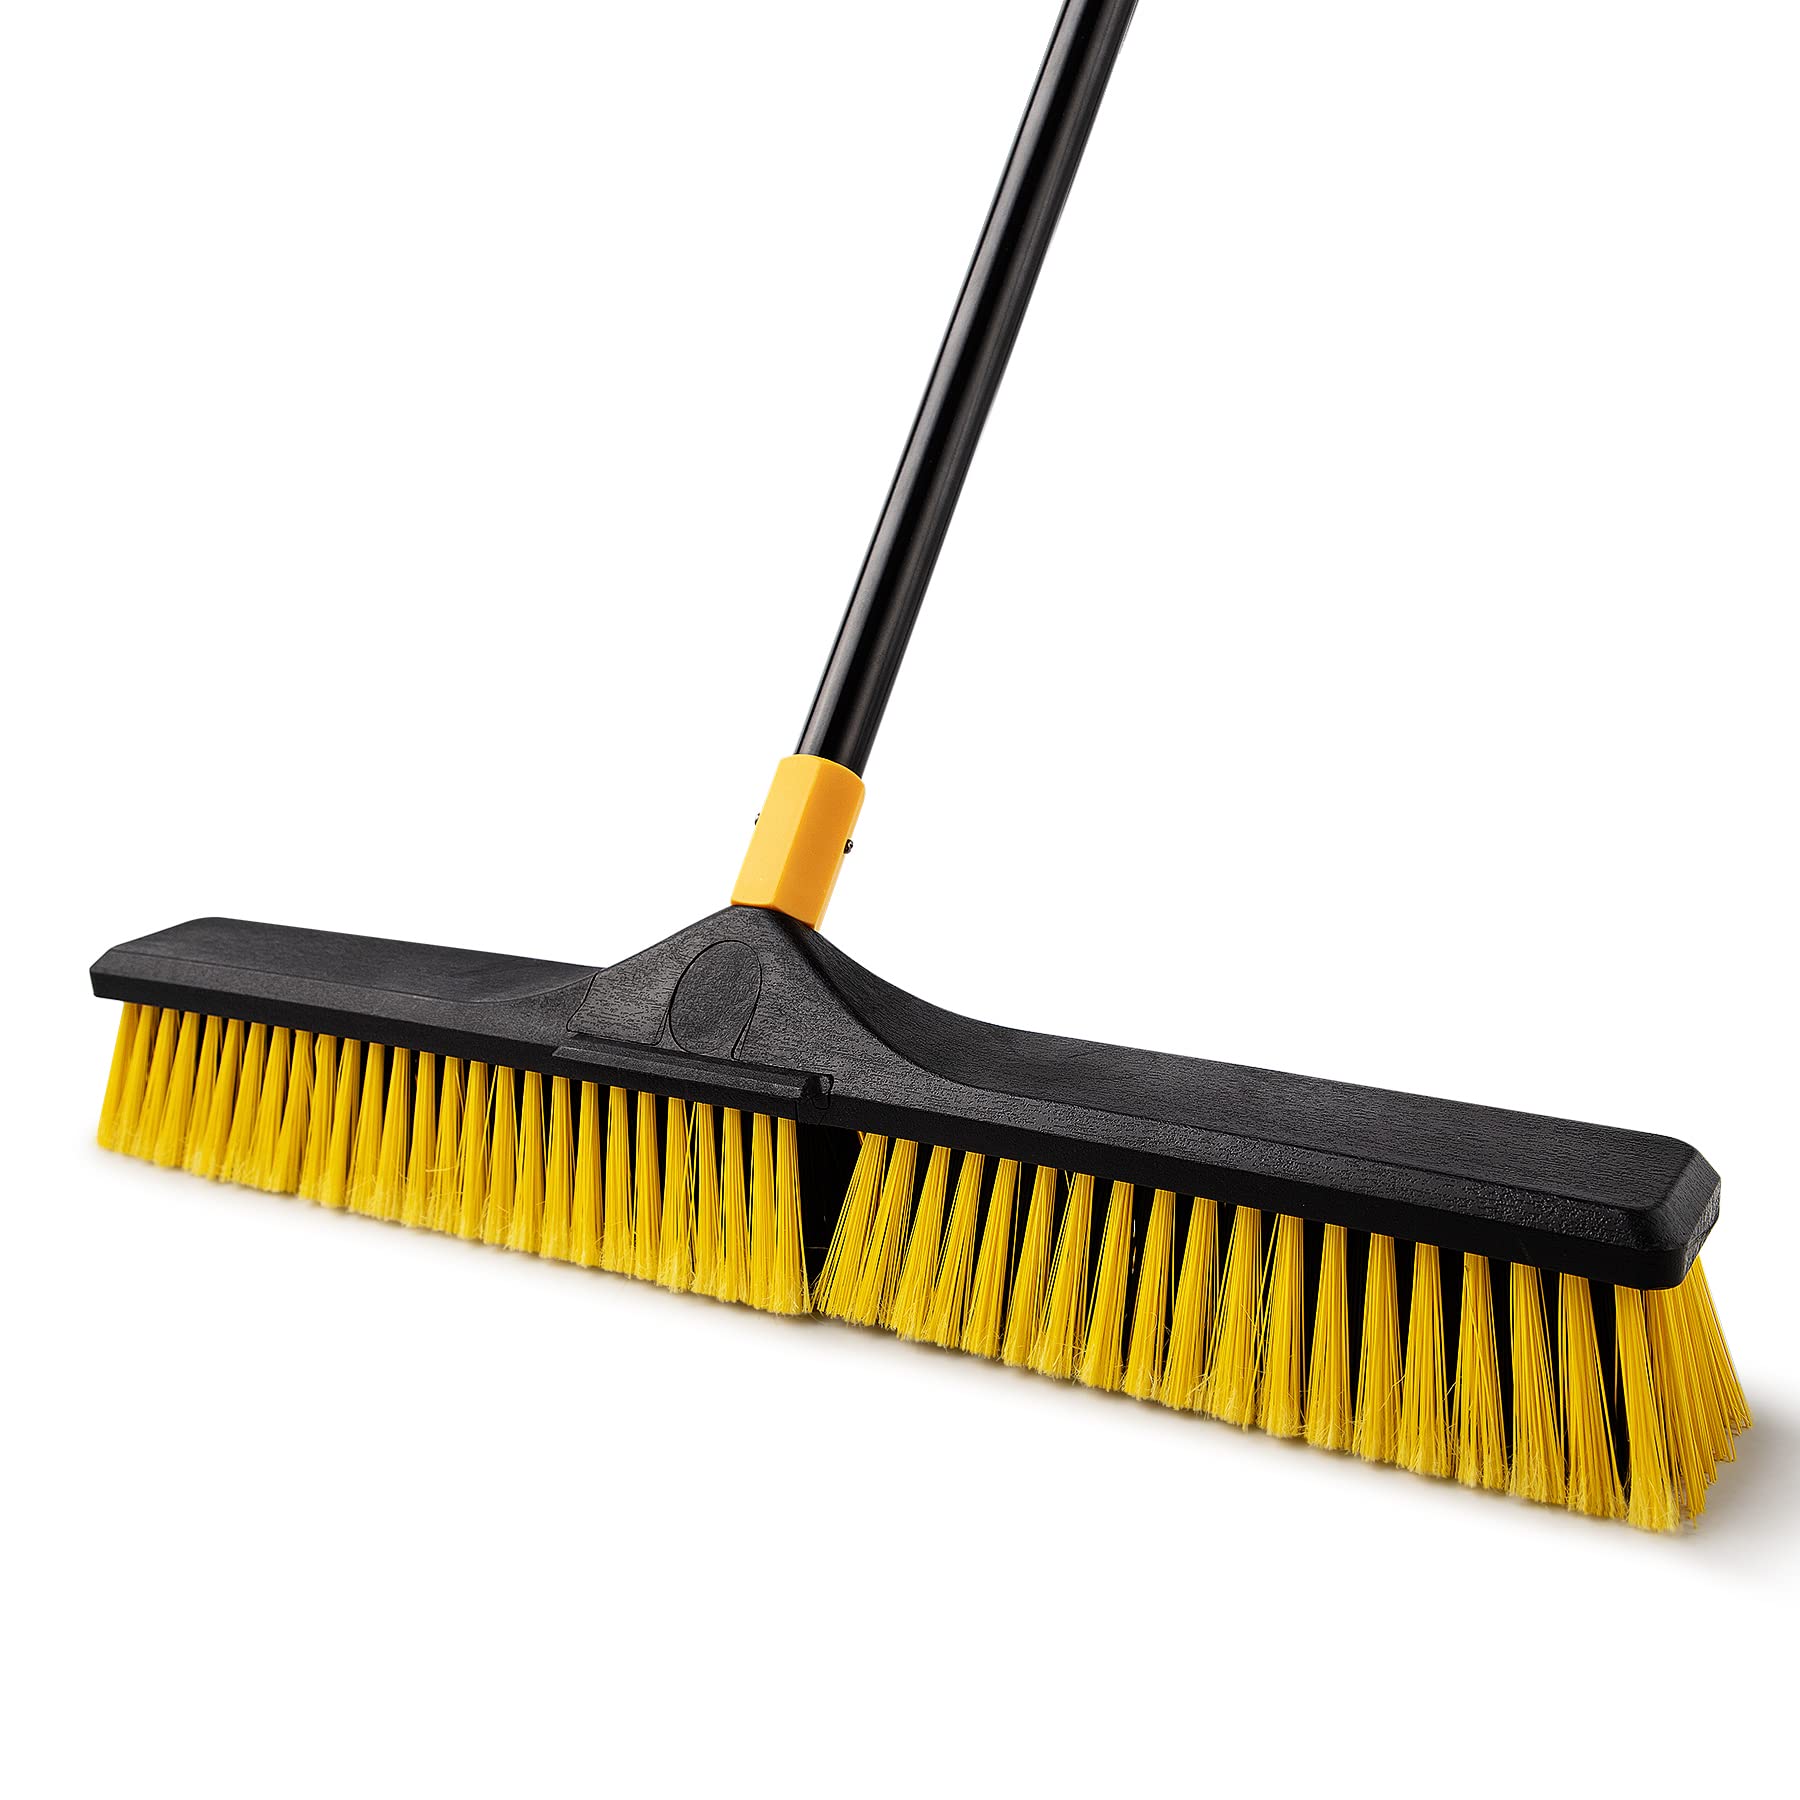 Cleaning brush or broom